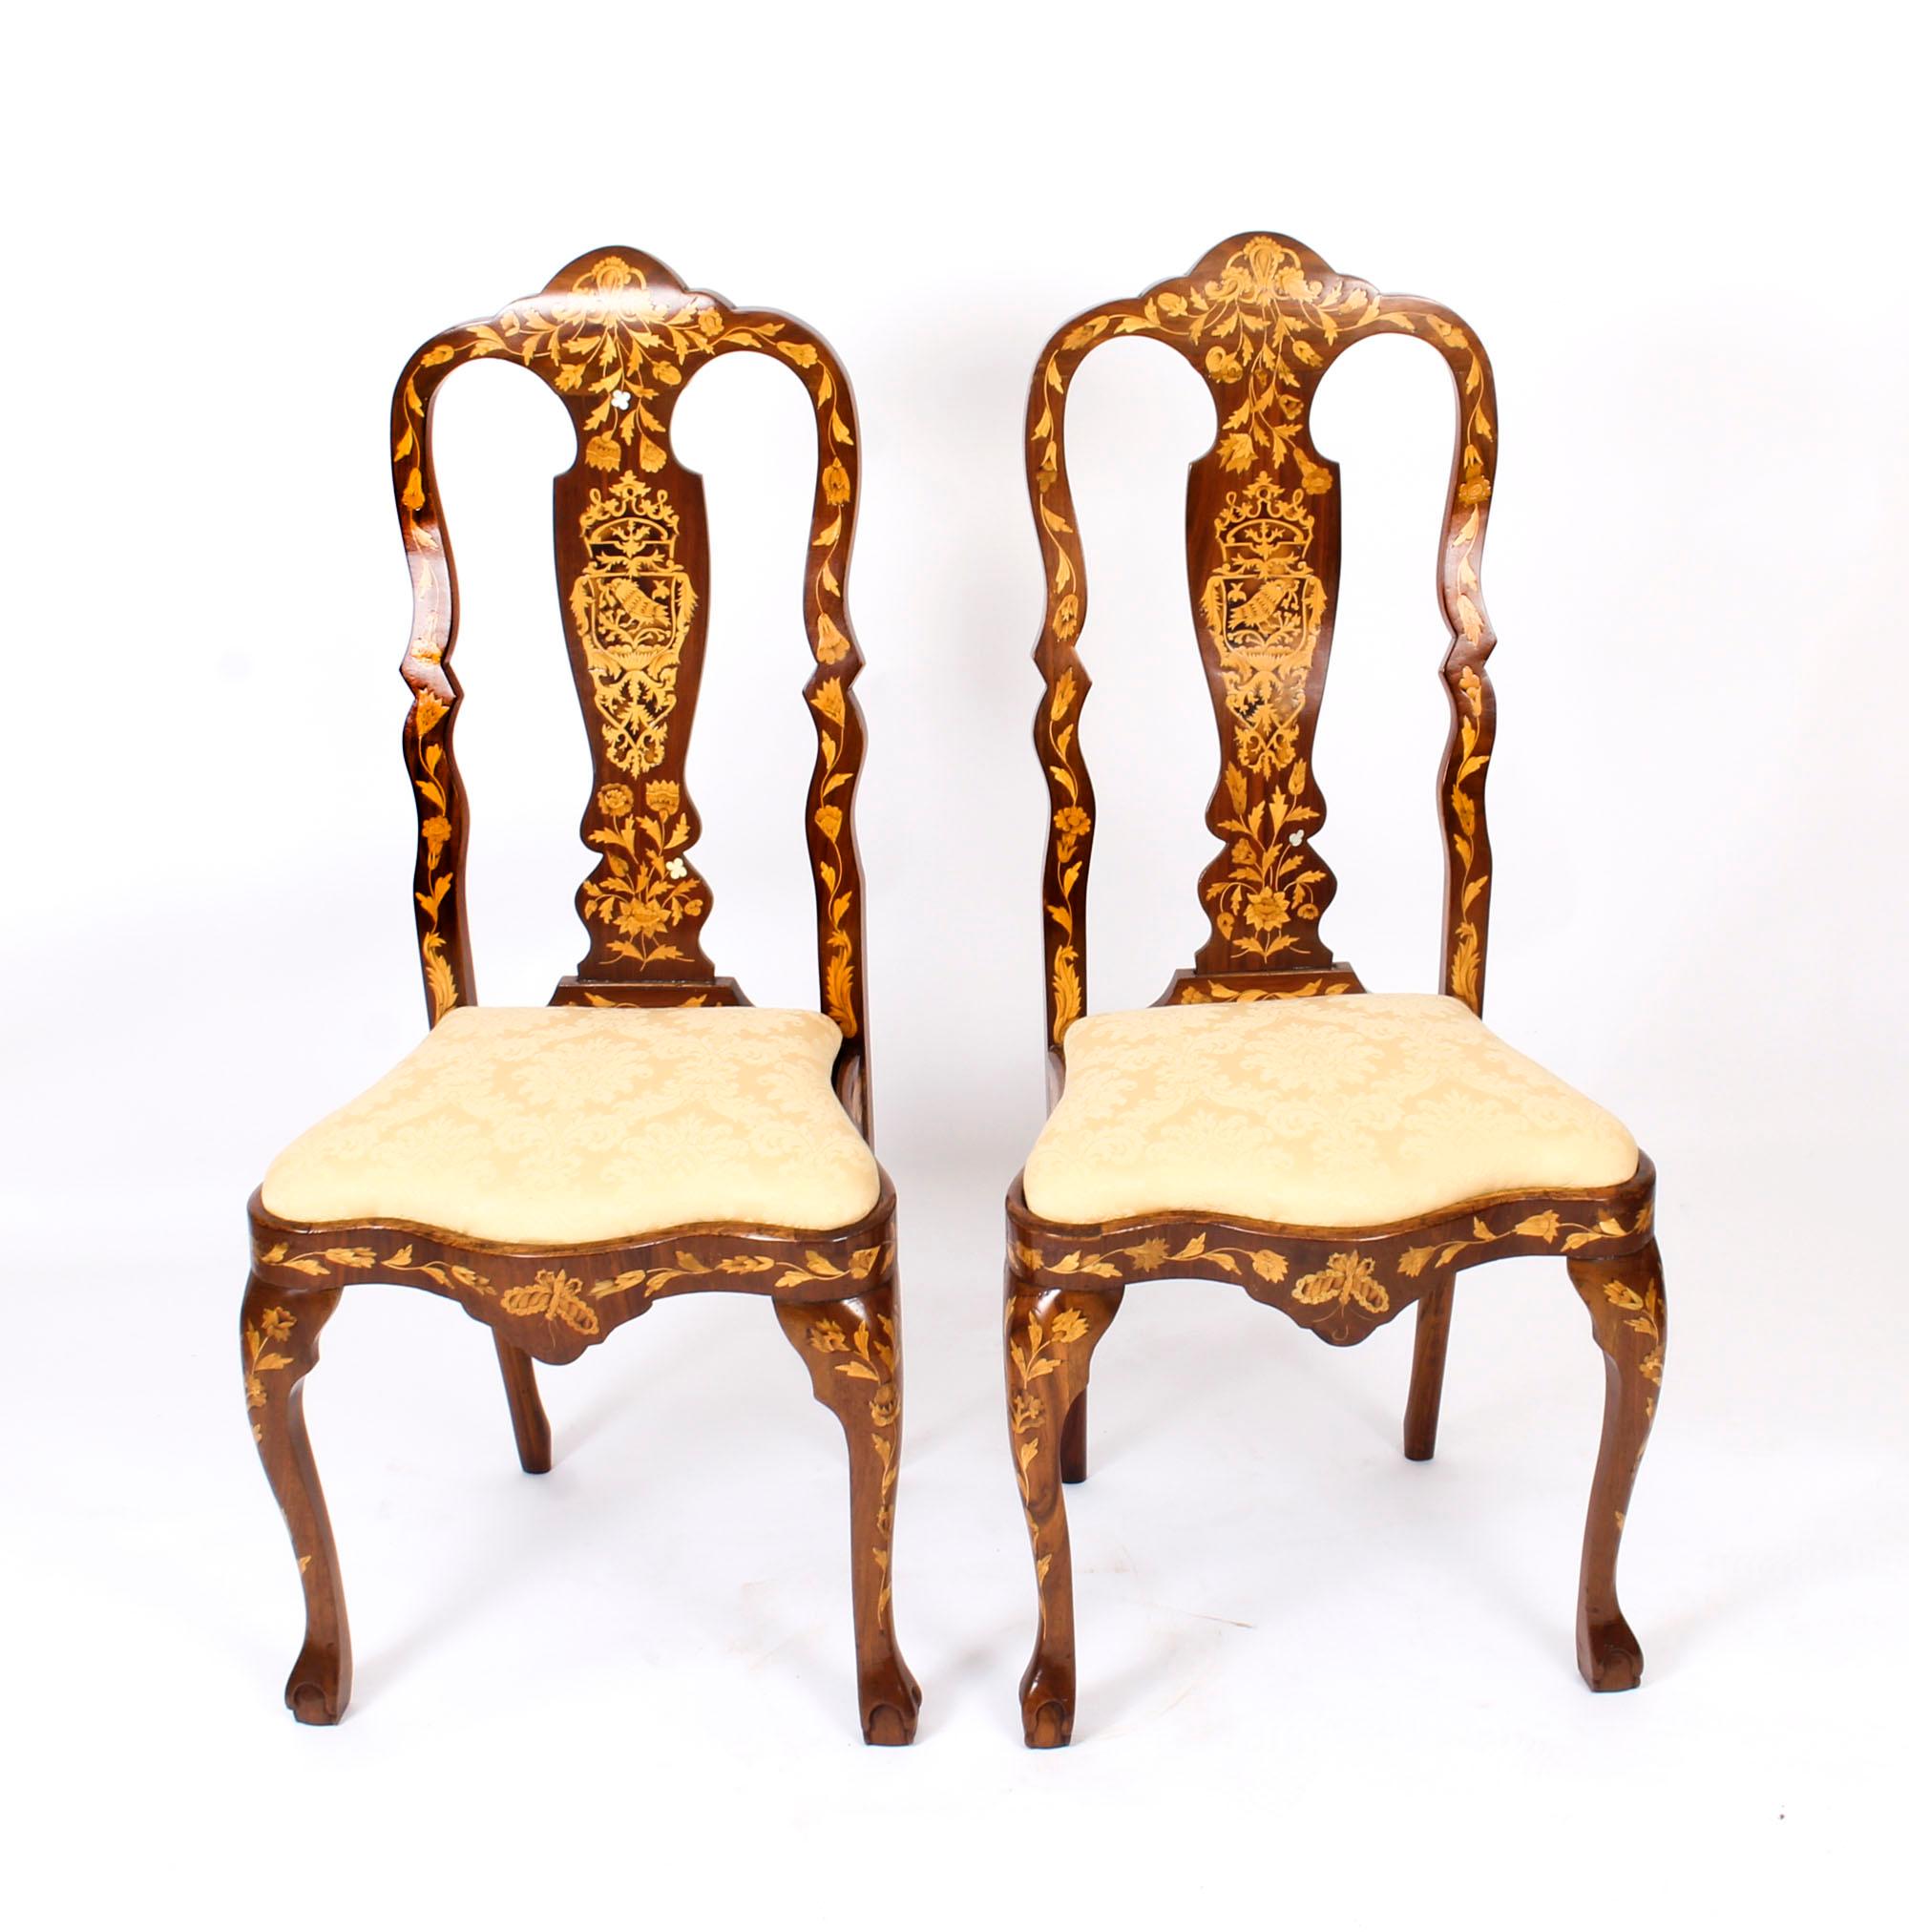 This is a wonderful and rare antique set of six high backed Dutch walnut and floral marquetry dining chairs, circa 1780 in date.

The chairs have been skillfully crafted from walnut, bear profuse floral marquetry inlaid decoration and are typical